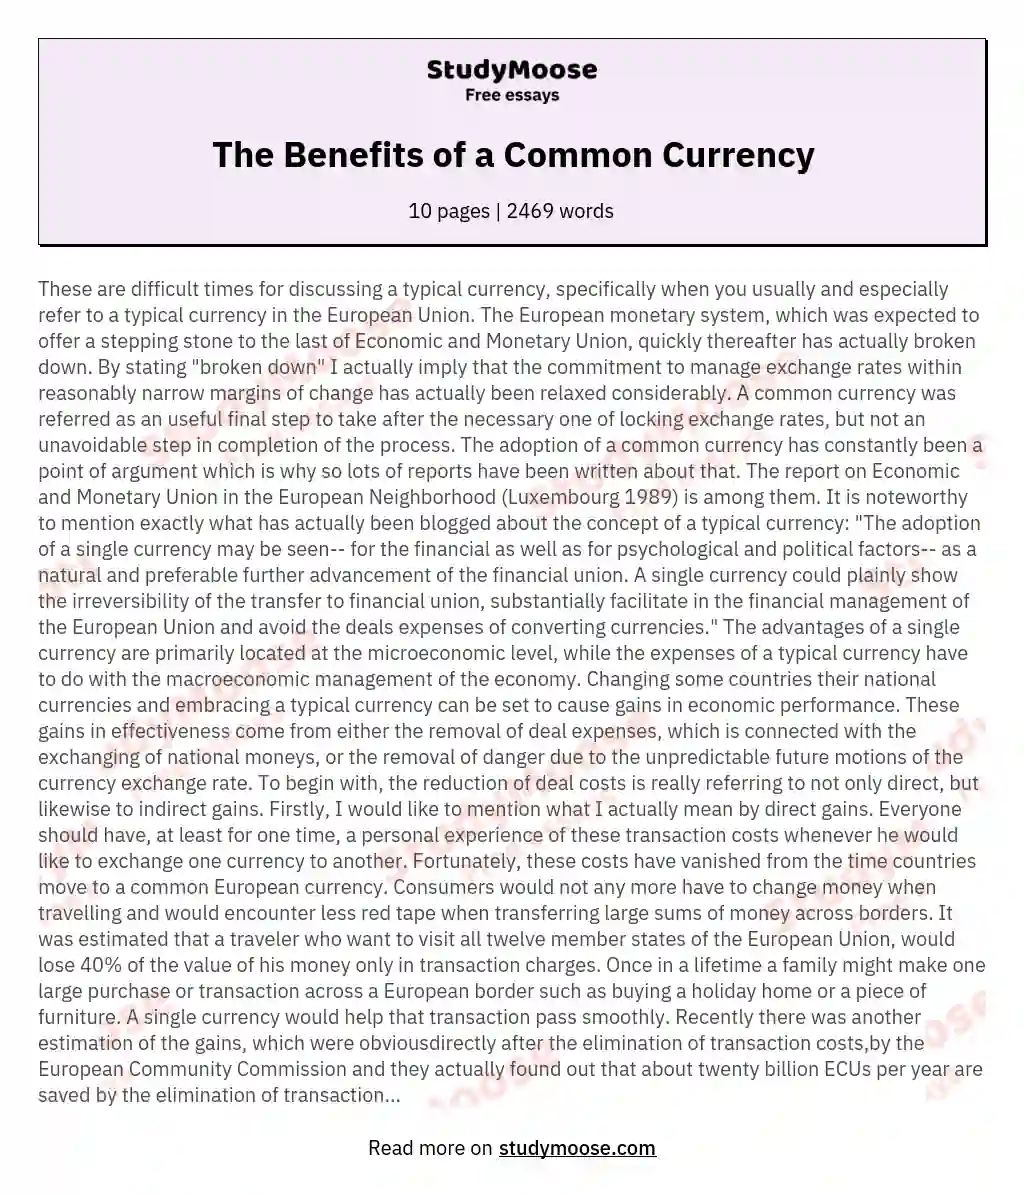 The Benefits of a Common Currency essay